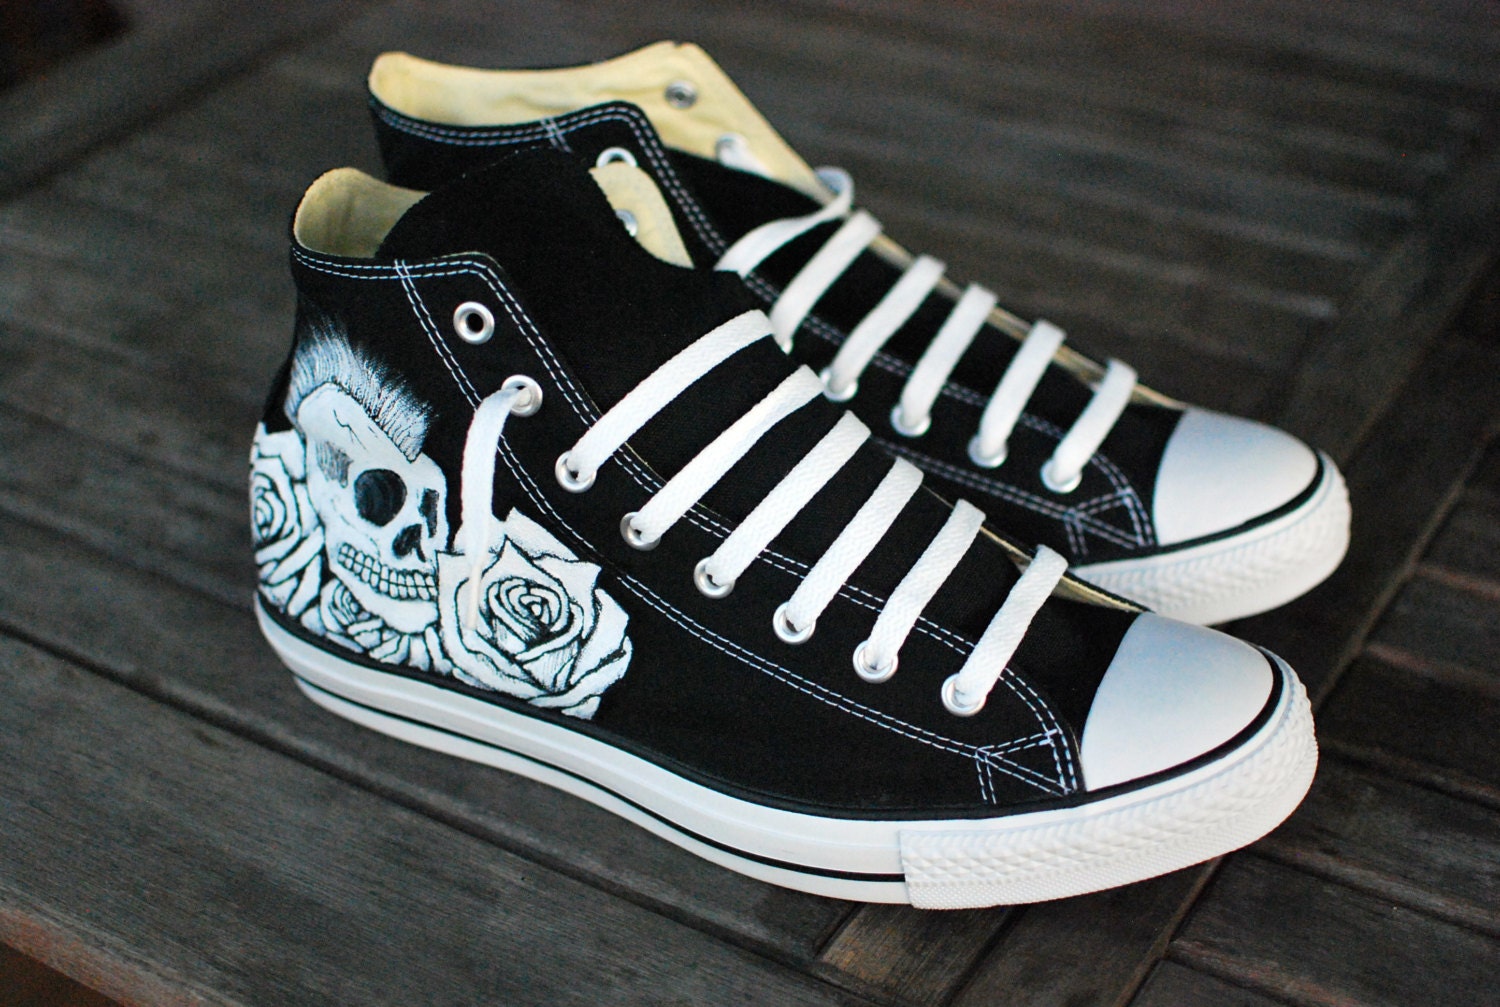 Rocker Skull and Roses Hi Top Converse by BStreetShoes on Etsy